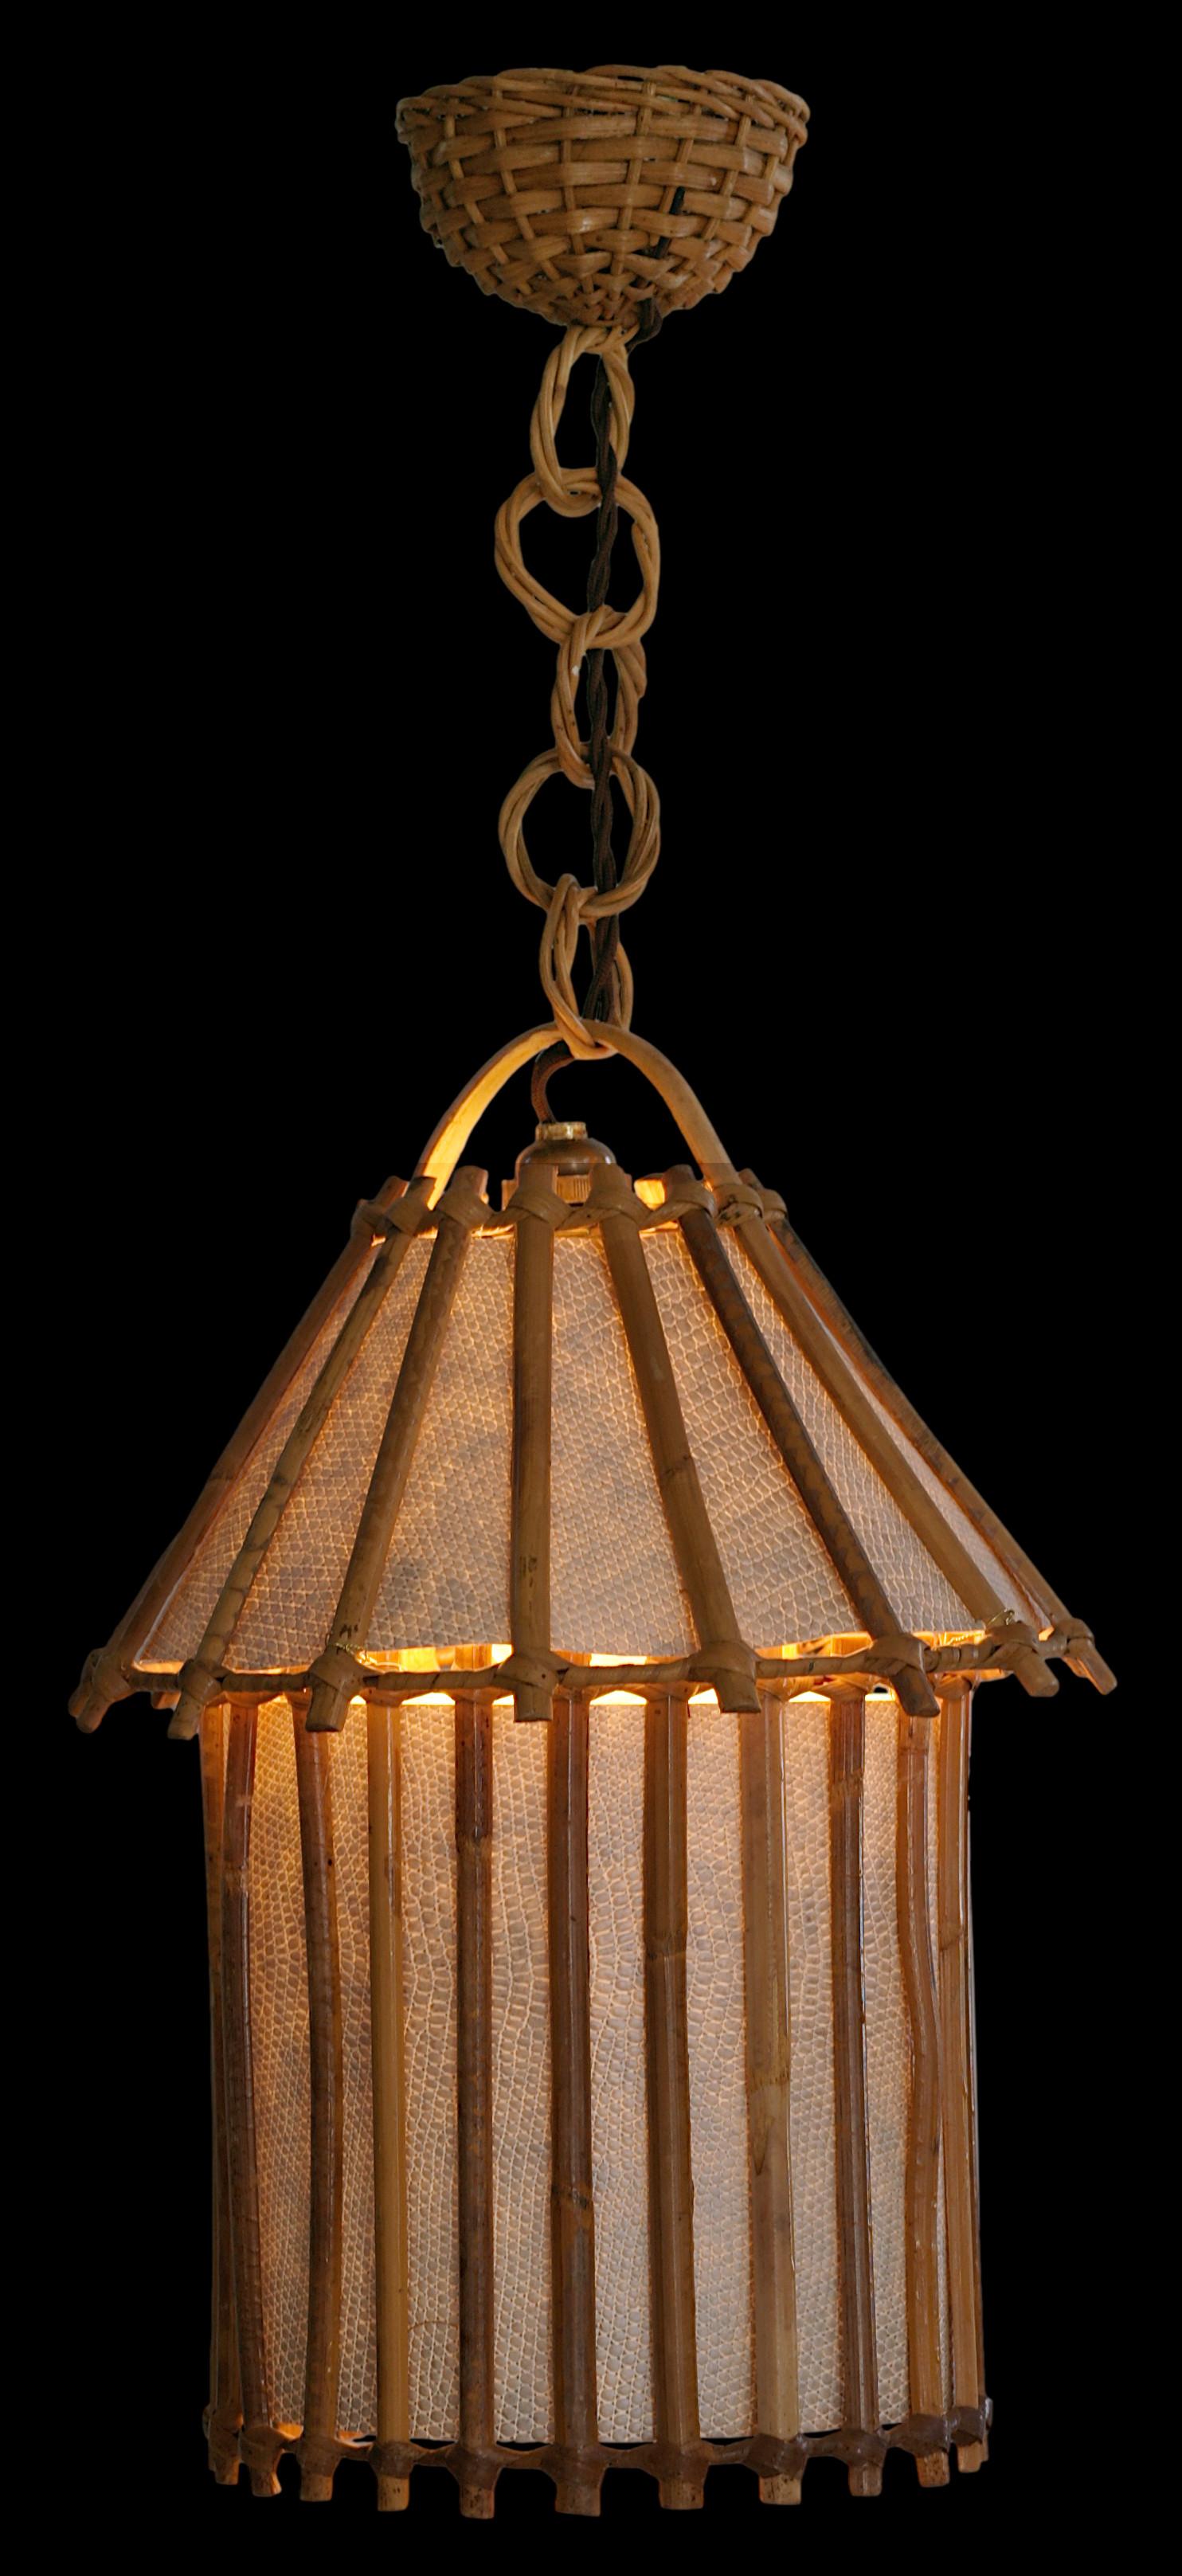 Bamboo lantern by Louis SOGNOT, France, 1950s. Bamboo, rattan and fabric. Measures: height: 21.5